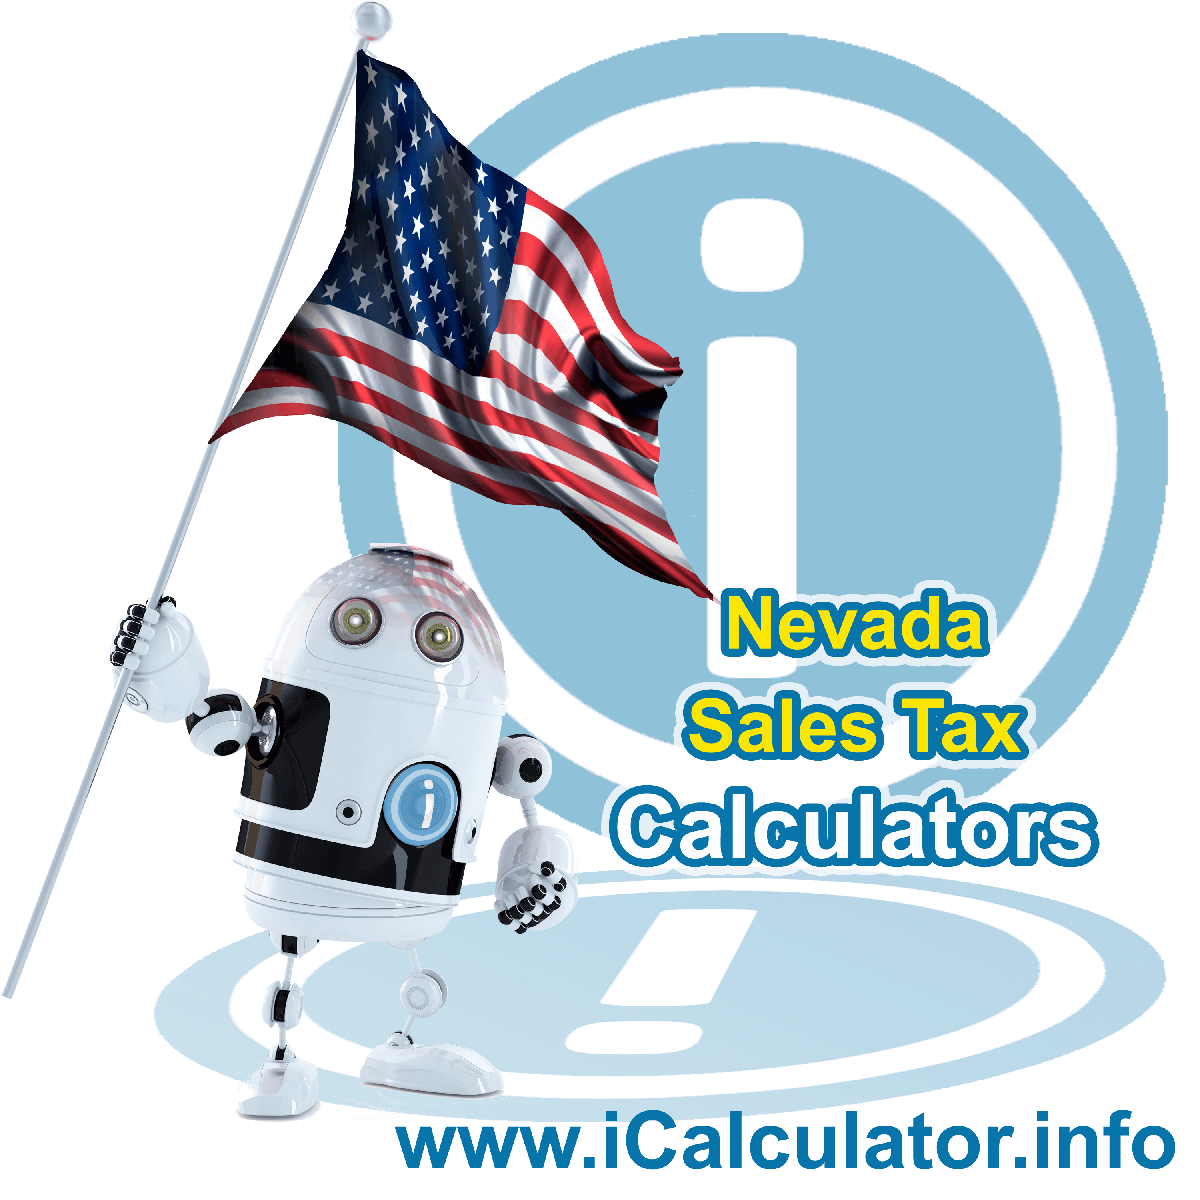 Nevada Sales Tax Comparison Calculator: This image illustrates a calculator robot comparing sales tax in Nevada manually using the Nevada Sales Tax Formula. You can use this information to compare Sales Tax manually or use the Nevada Sales Tax Comparison Calculator to calculate and compare Nevada sales tax online.